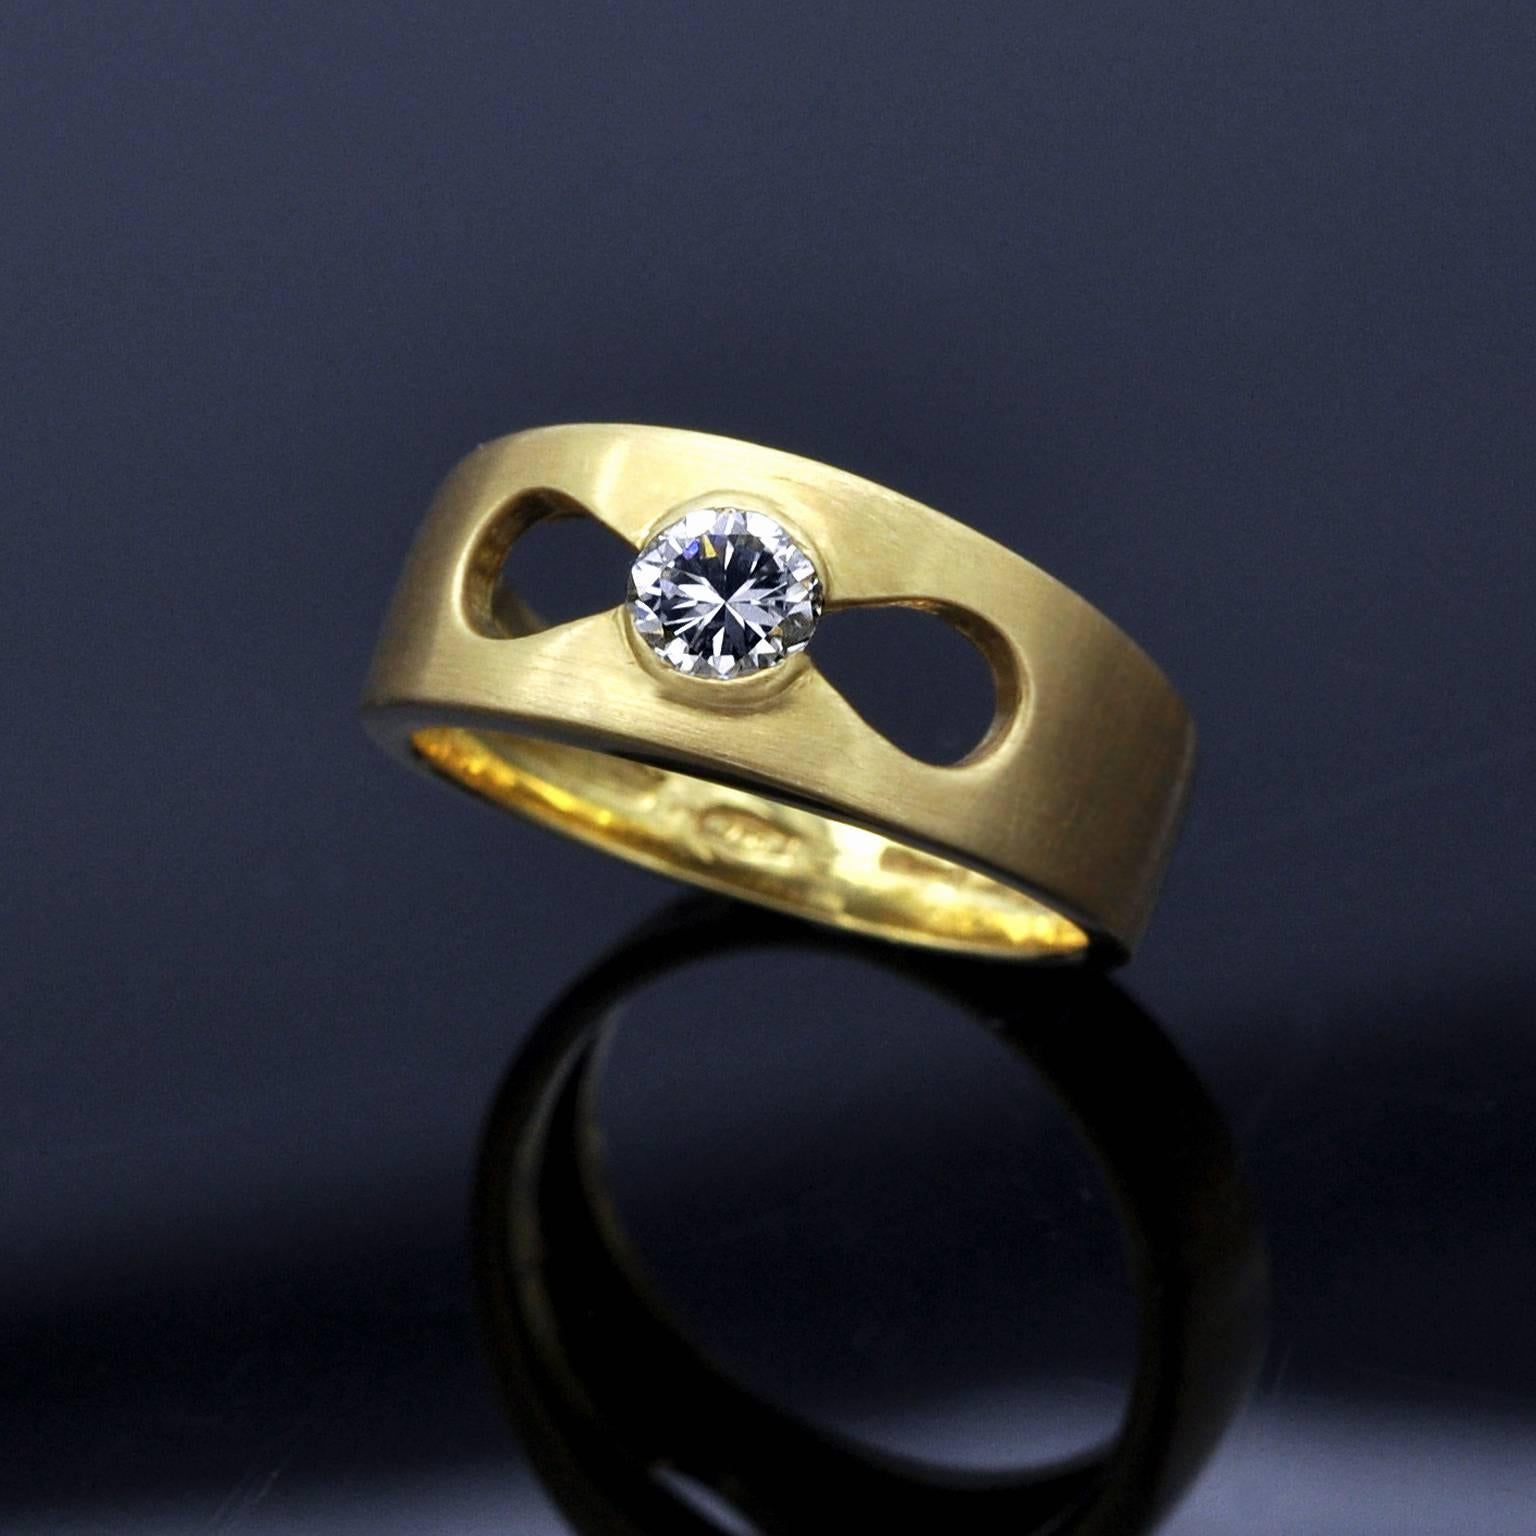 Stylish modern solitaire ring : it is a 18 Karat brushed yellow gold band ring with polished sides showcasing  a 0.35 carat diamond (F G VS2)  in a gracefully designed opening . 
Weight : 6.65 grams